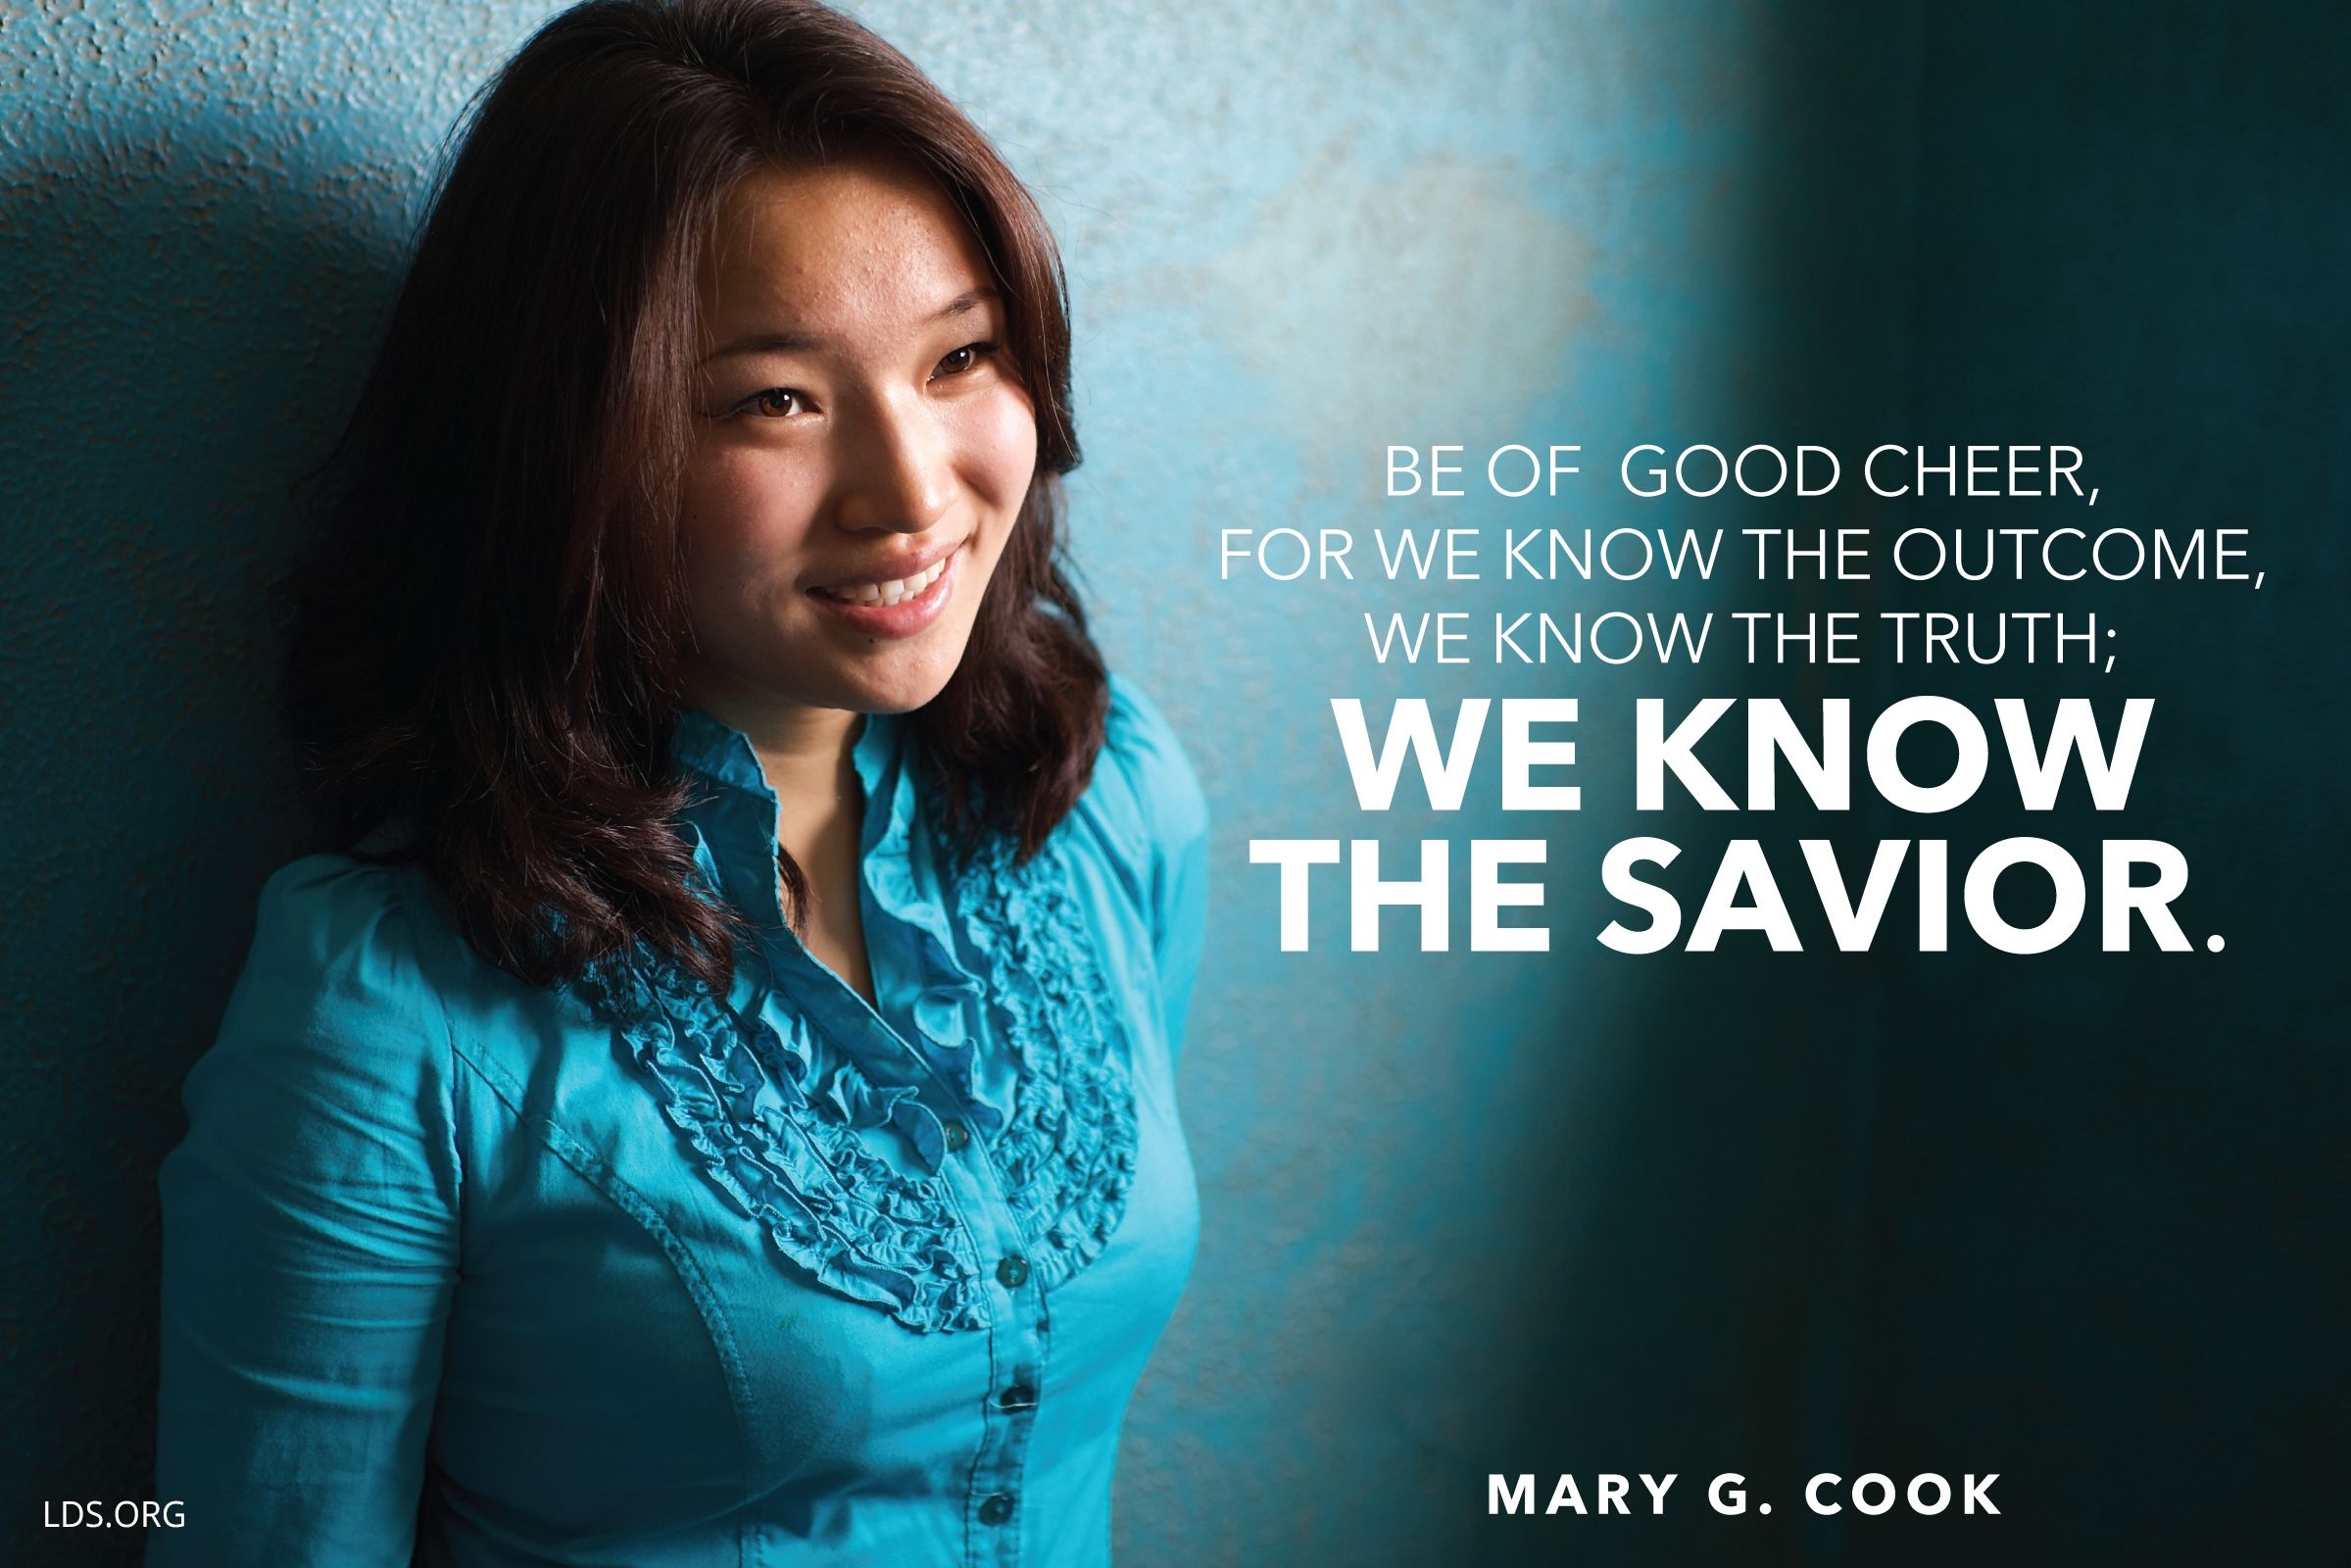 “Be of good cheer, for we know the outcome, we know the truth; we know the Savior.”—Sister Mary G. Cook, “Follow Jesus Christ and Reap Spiritual Rewards”